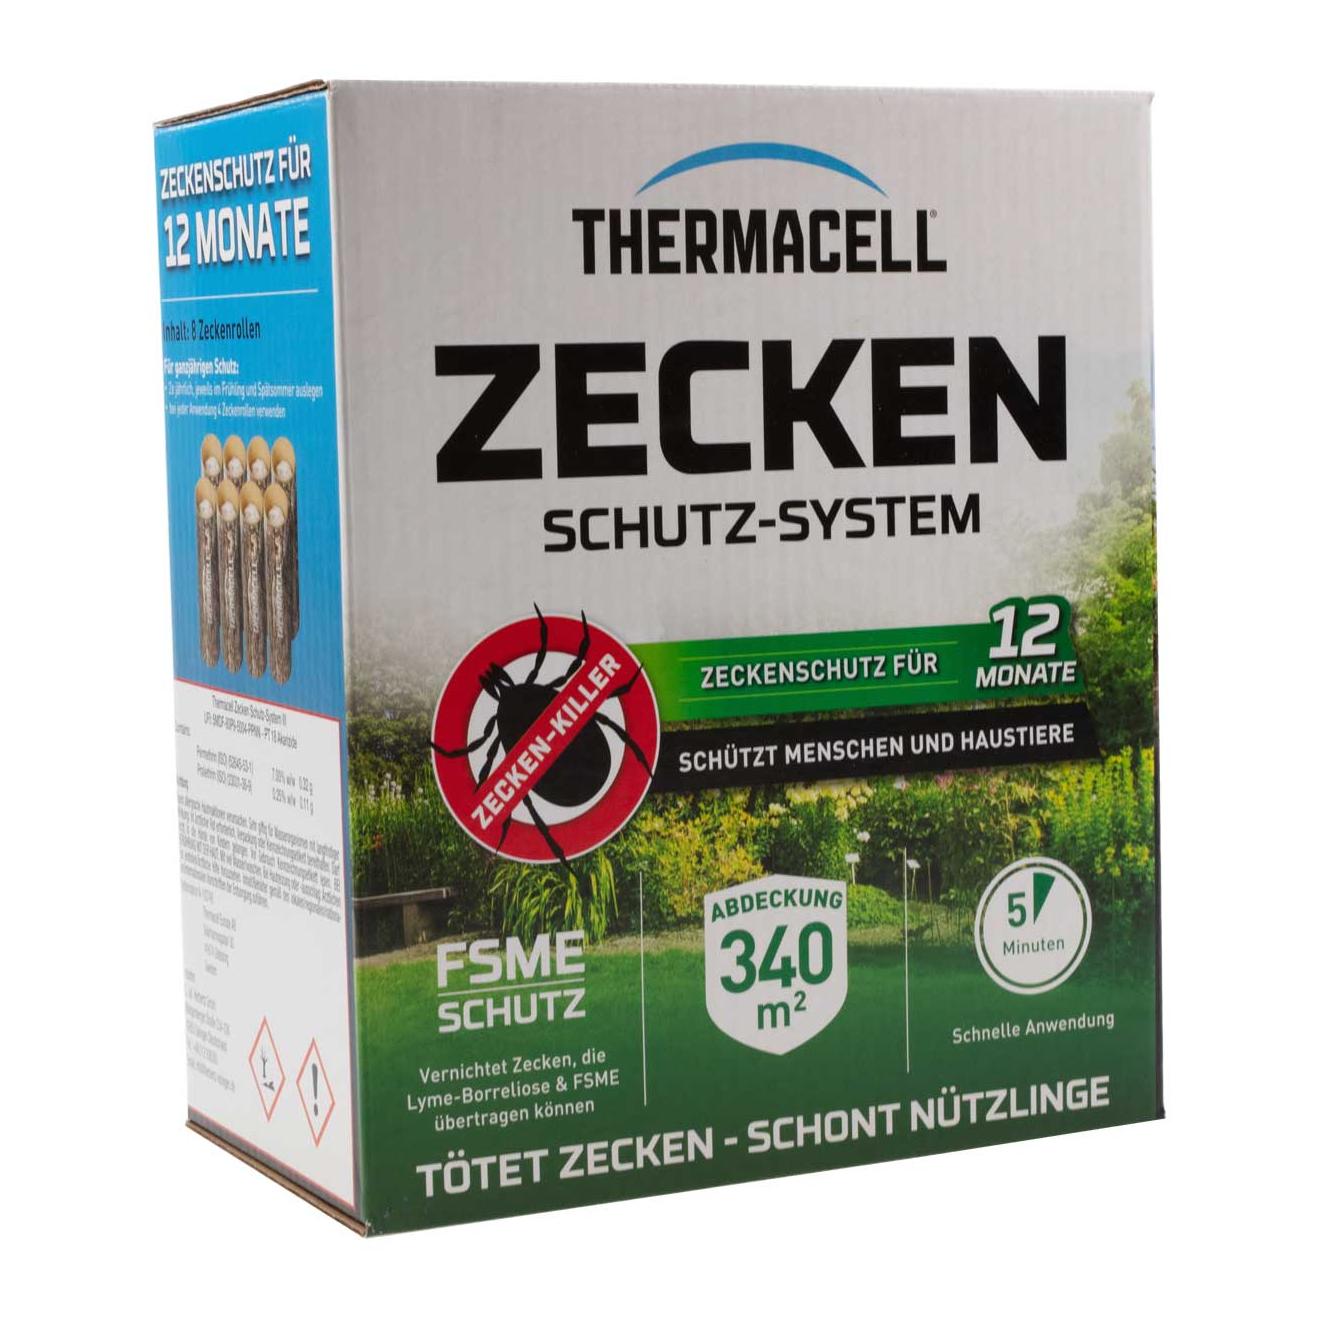 Thermacell Zeckenrolle von Thermacell